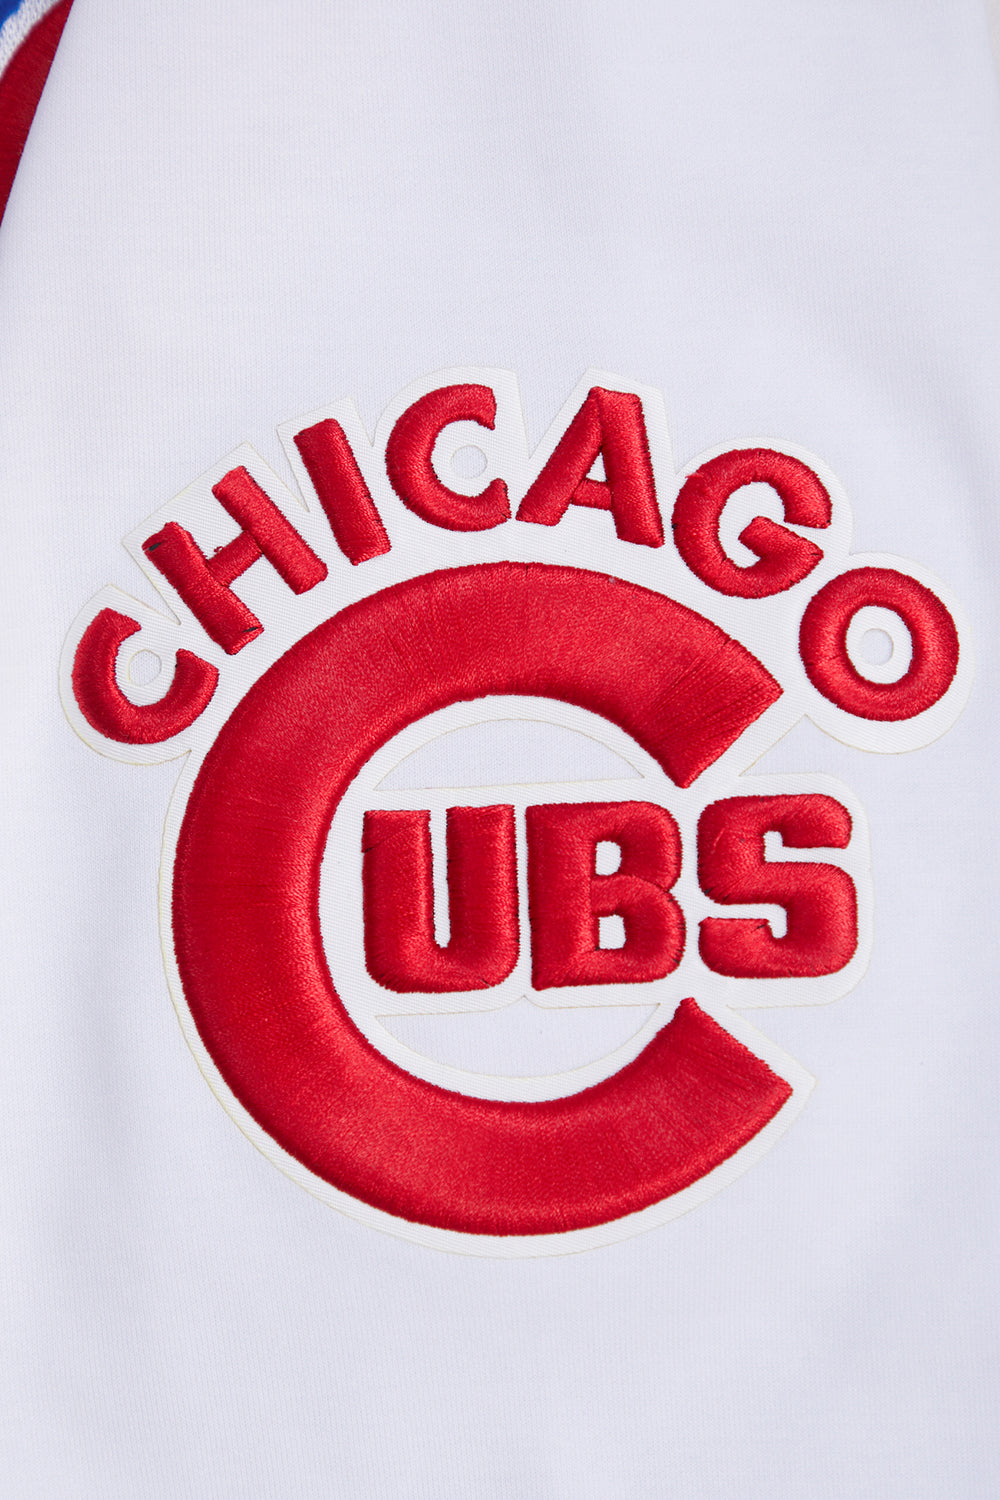 CHICAGO CUBS CLASSIC CHENILLE DK PO HOODIE (WHITE) – Pro Standard